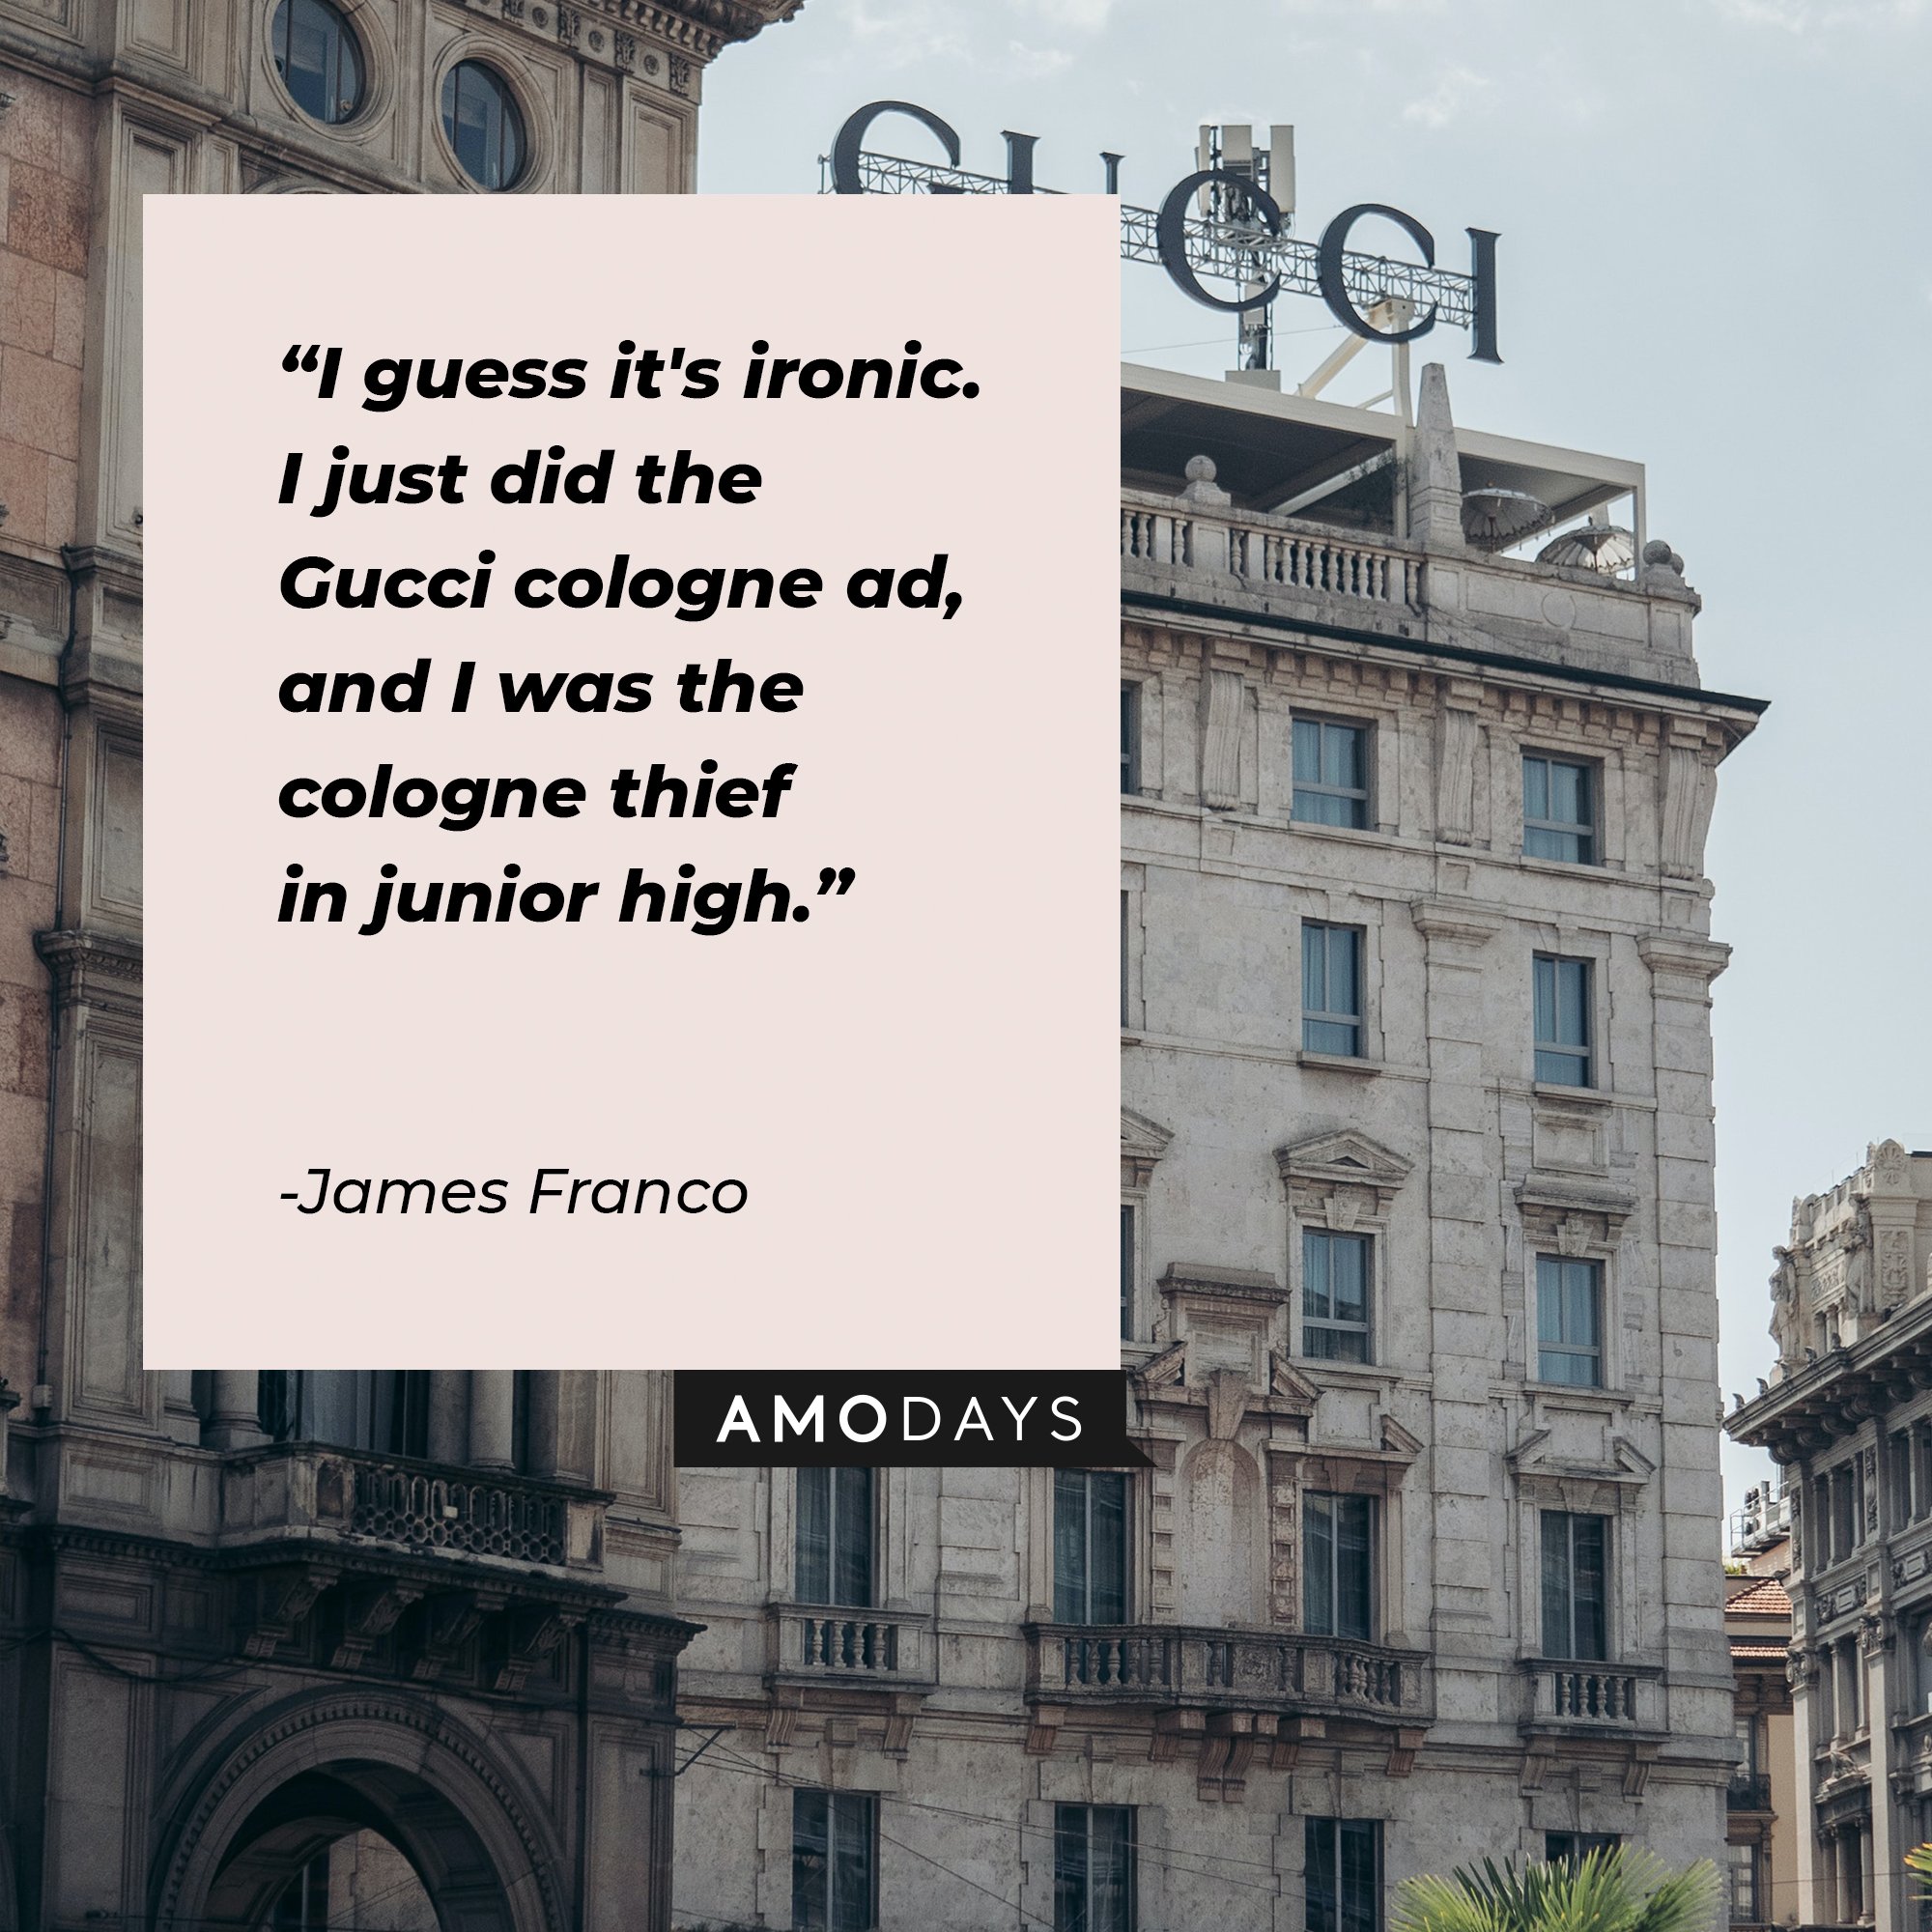 James Franco's quote "I guess it's ironic. I just did the Gucci cologne ad, and I was the cologne thief in junior high." | Source: Unsplash.com